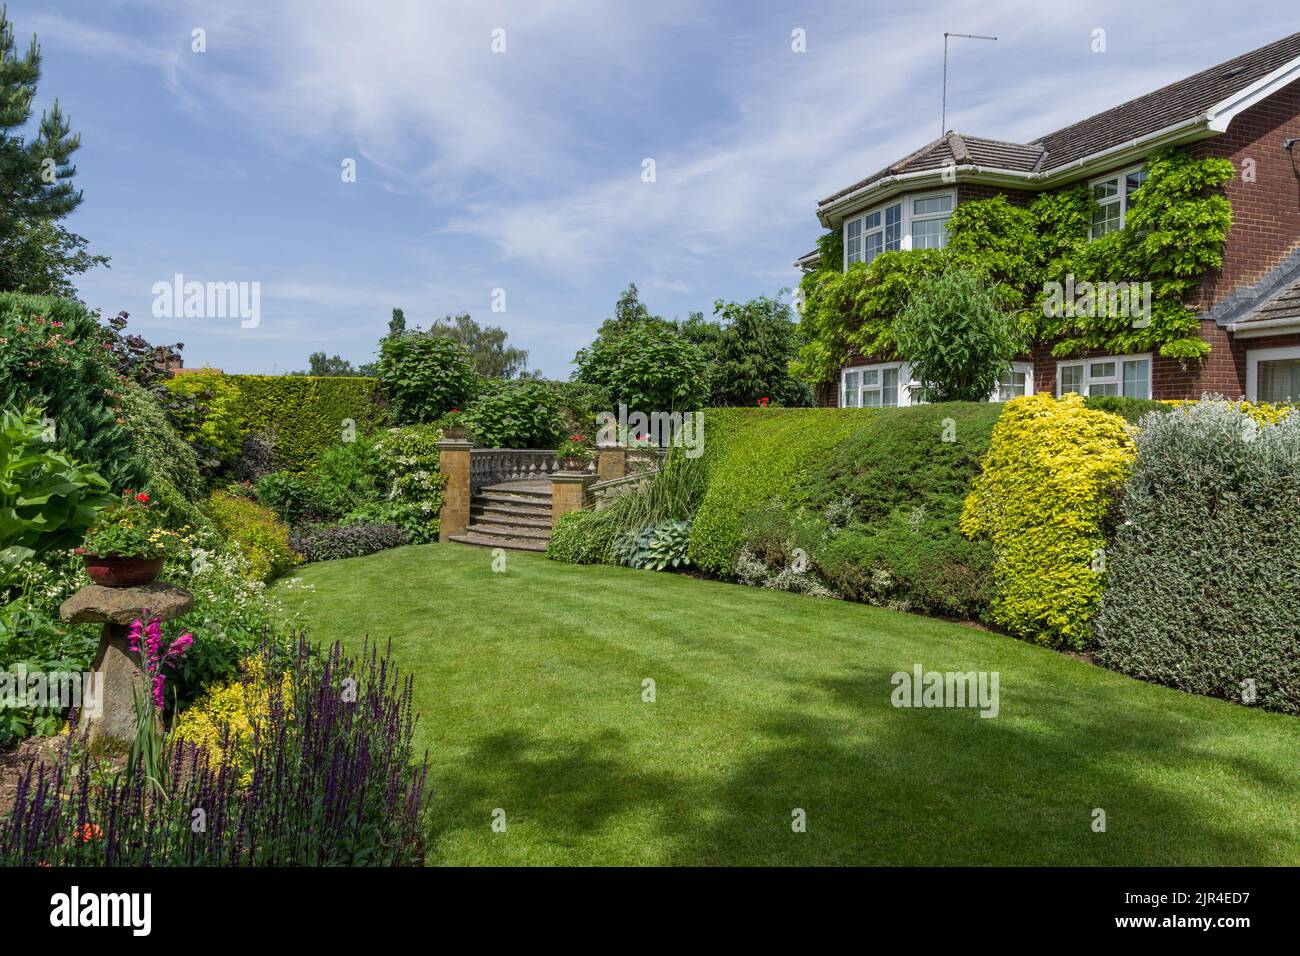 Typical English suburban garden in Summer laid to lawn, herbaceous borders and trees, Gayton village, Northamptonshire; part of open garden scheme Stock Photo